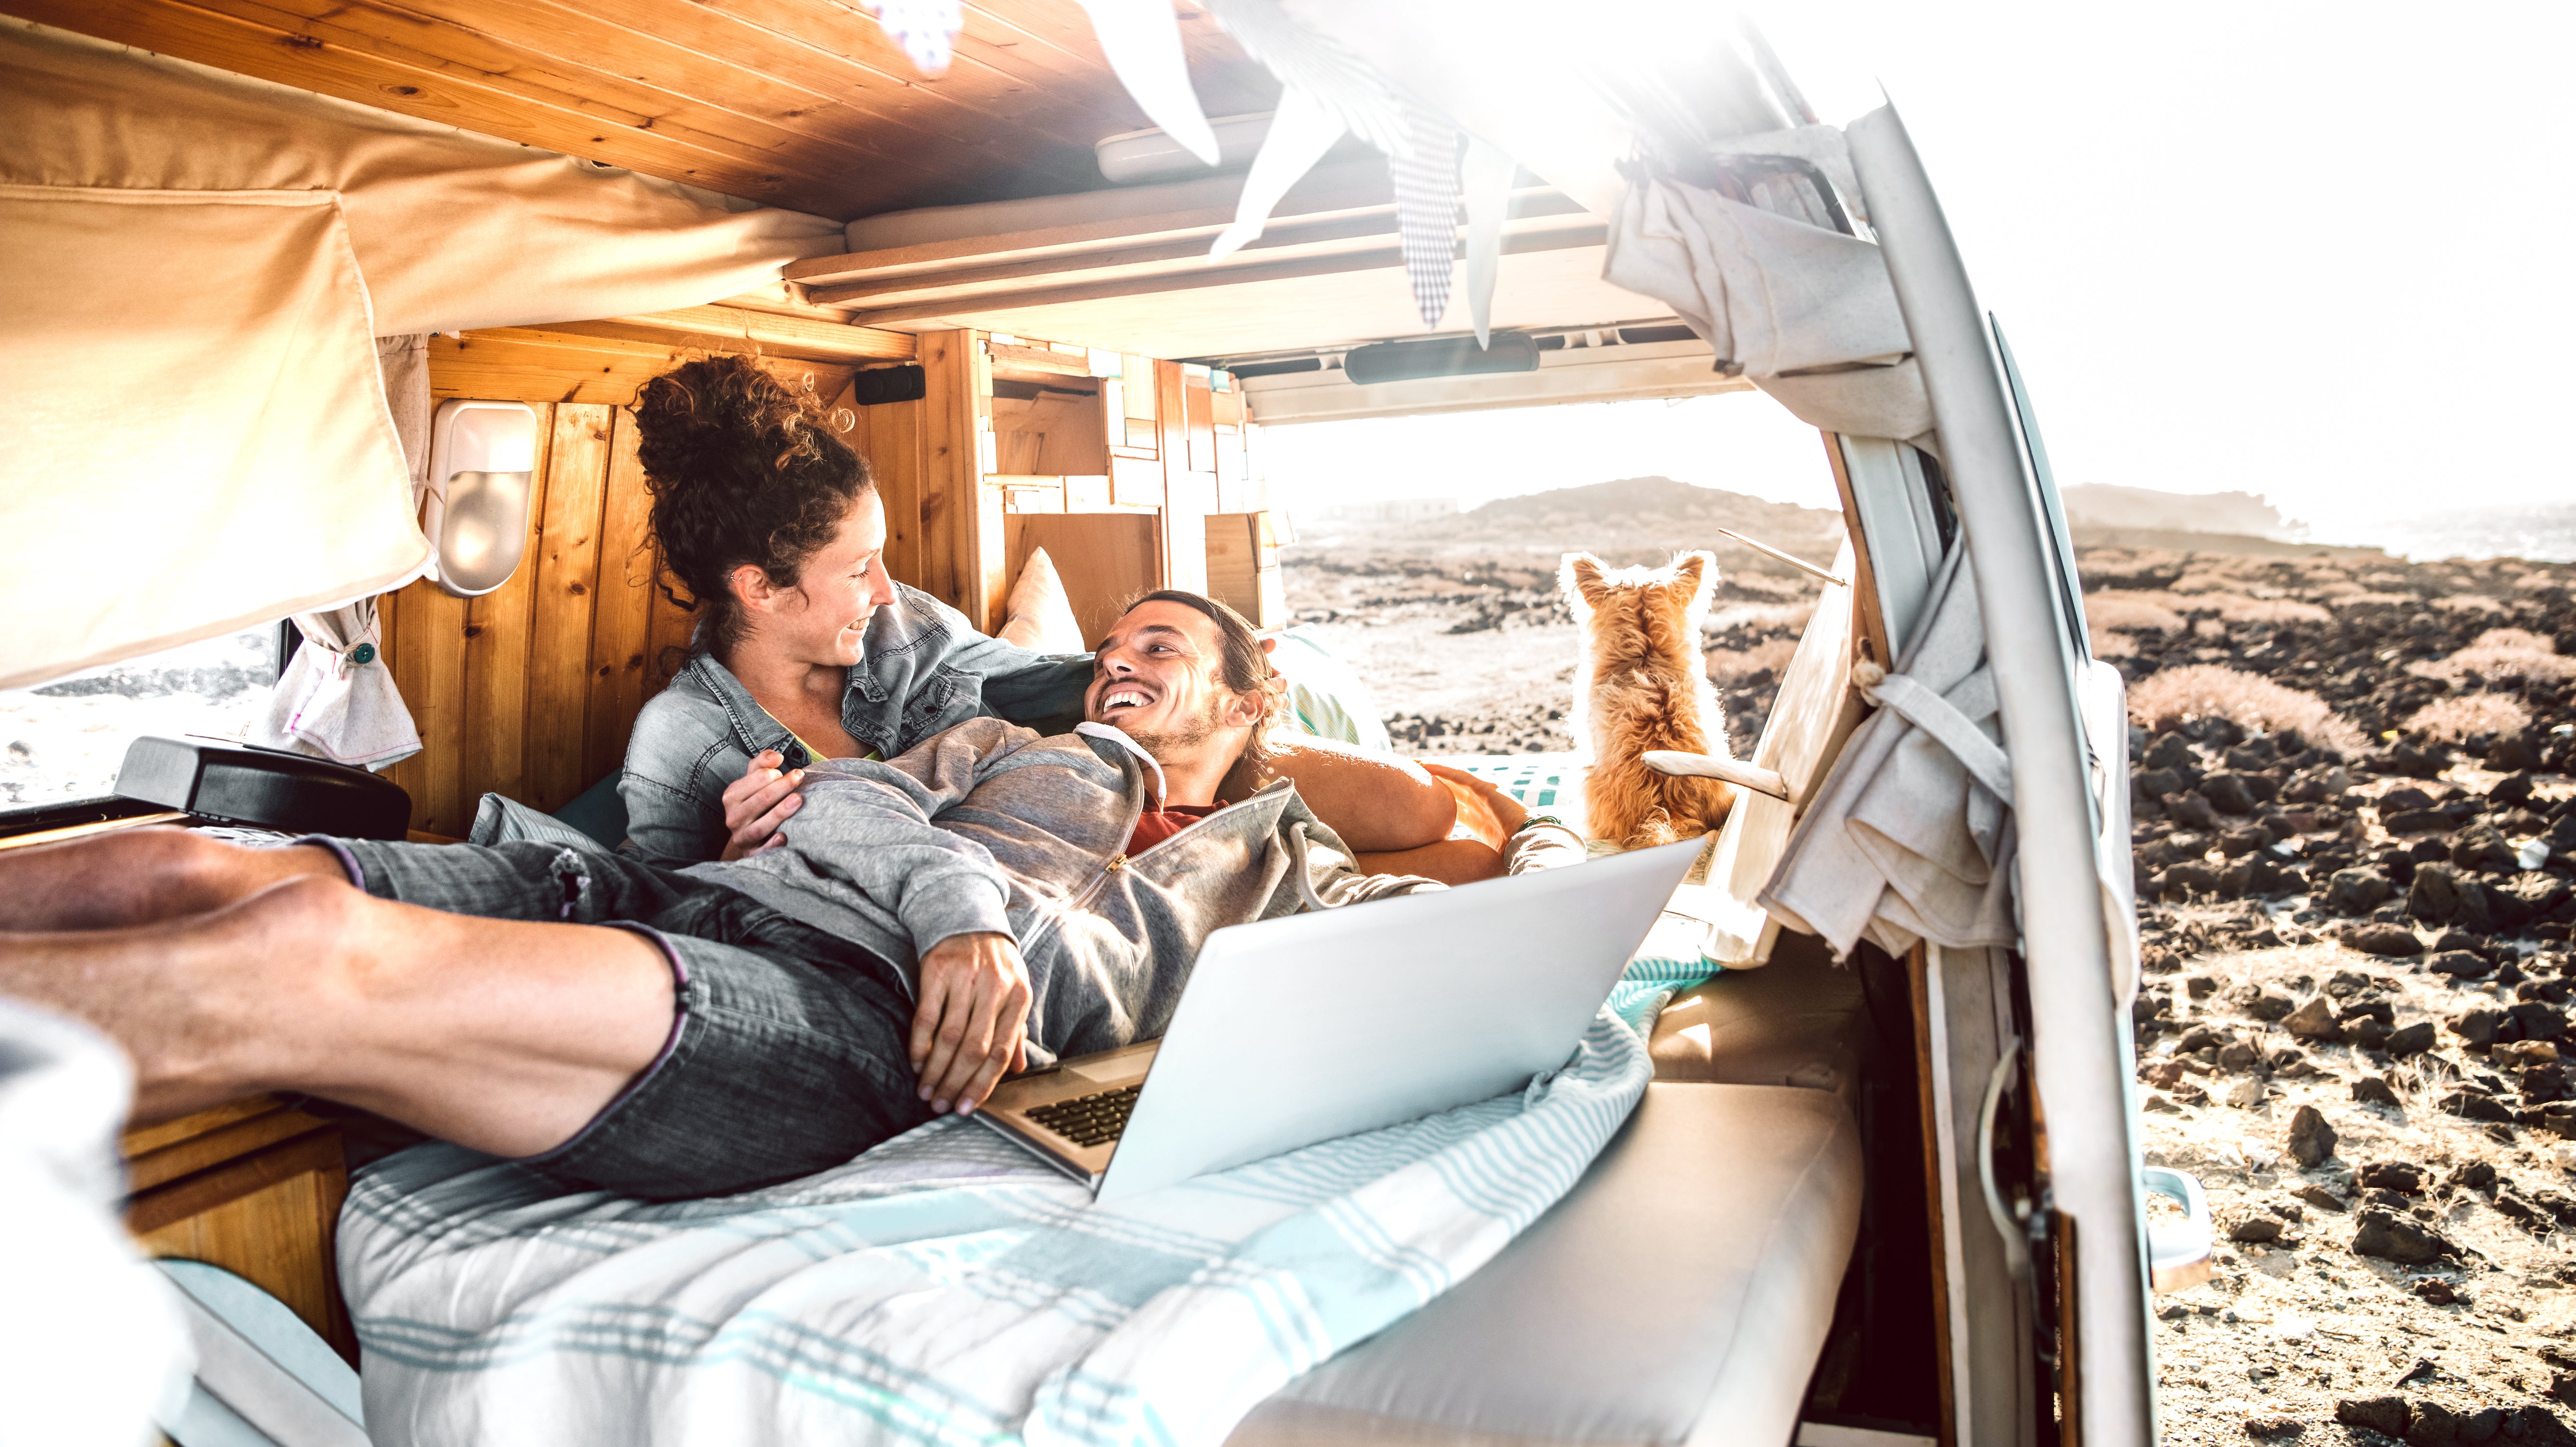 Enjoy a restful night’s sleep on your travels.